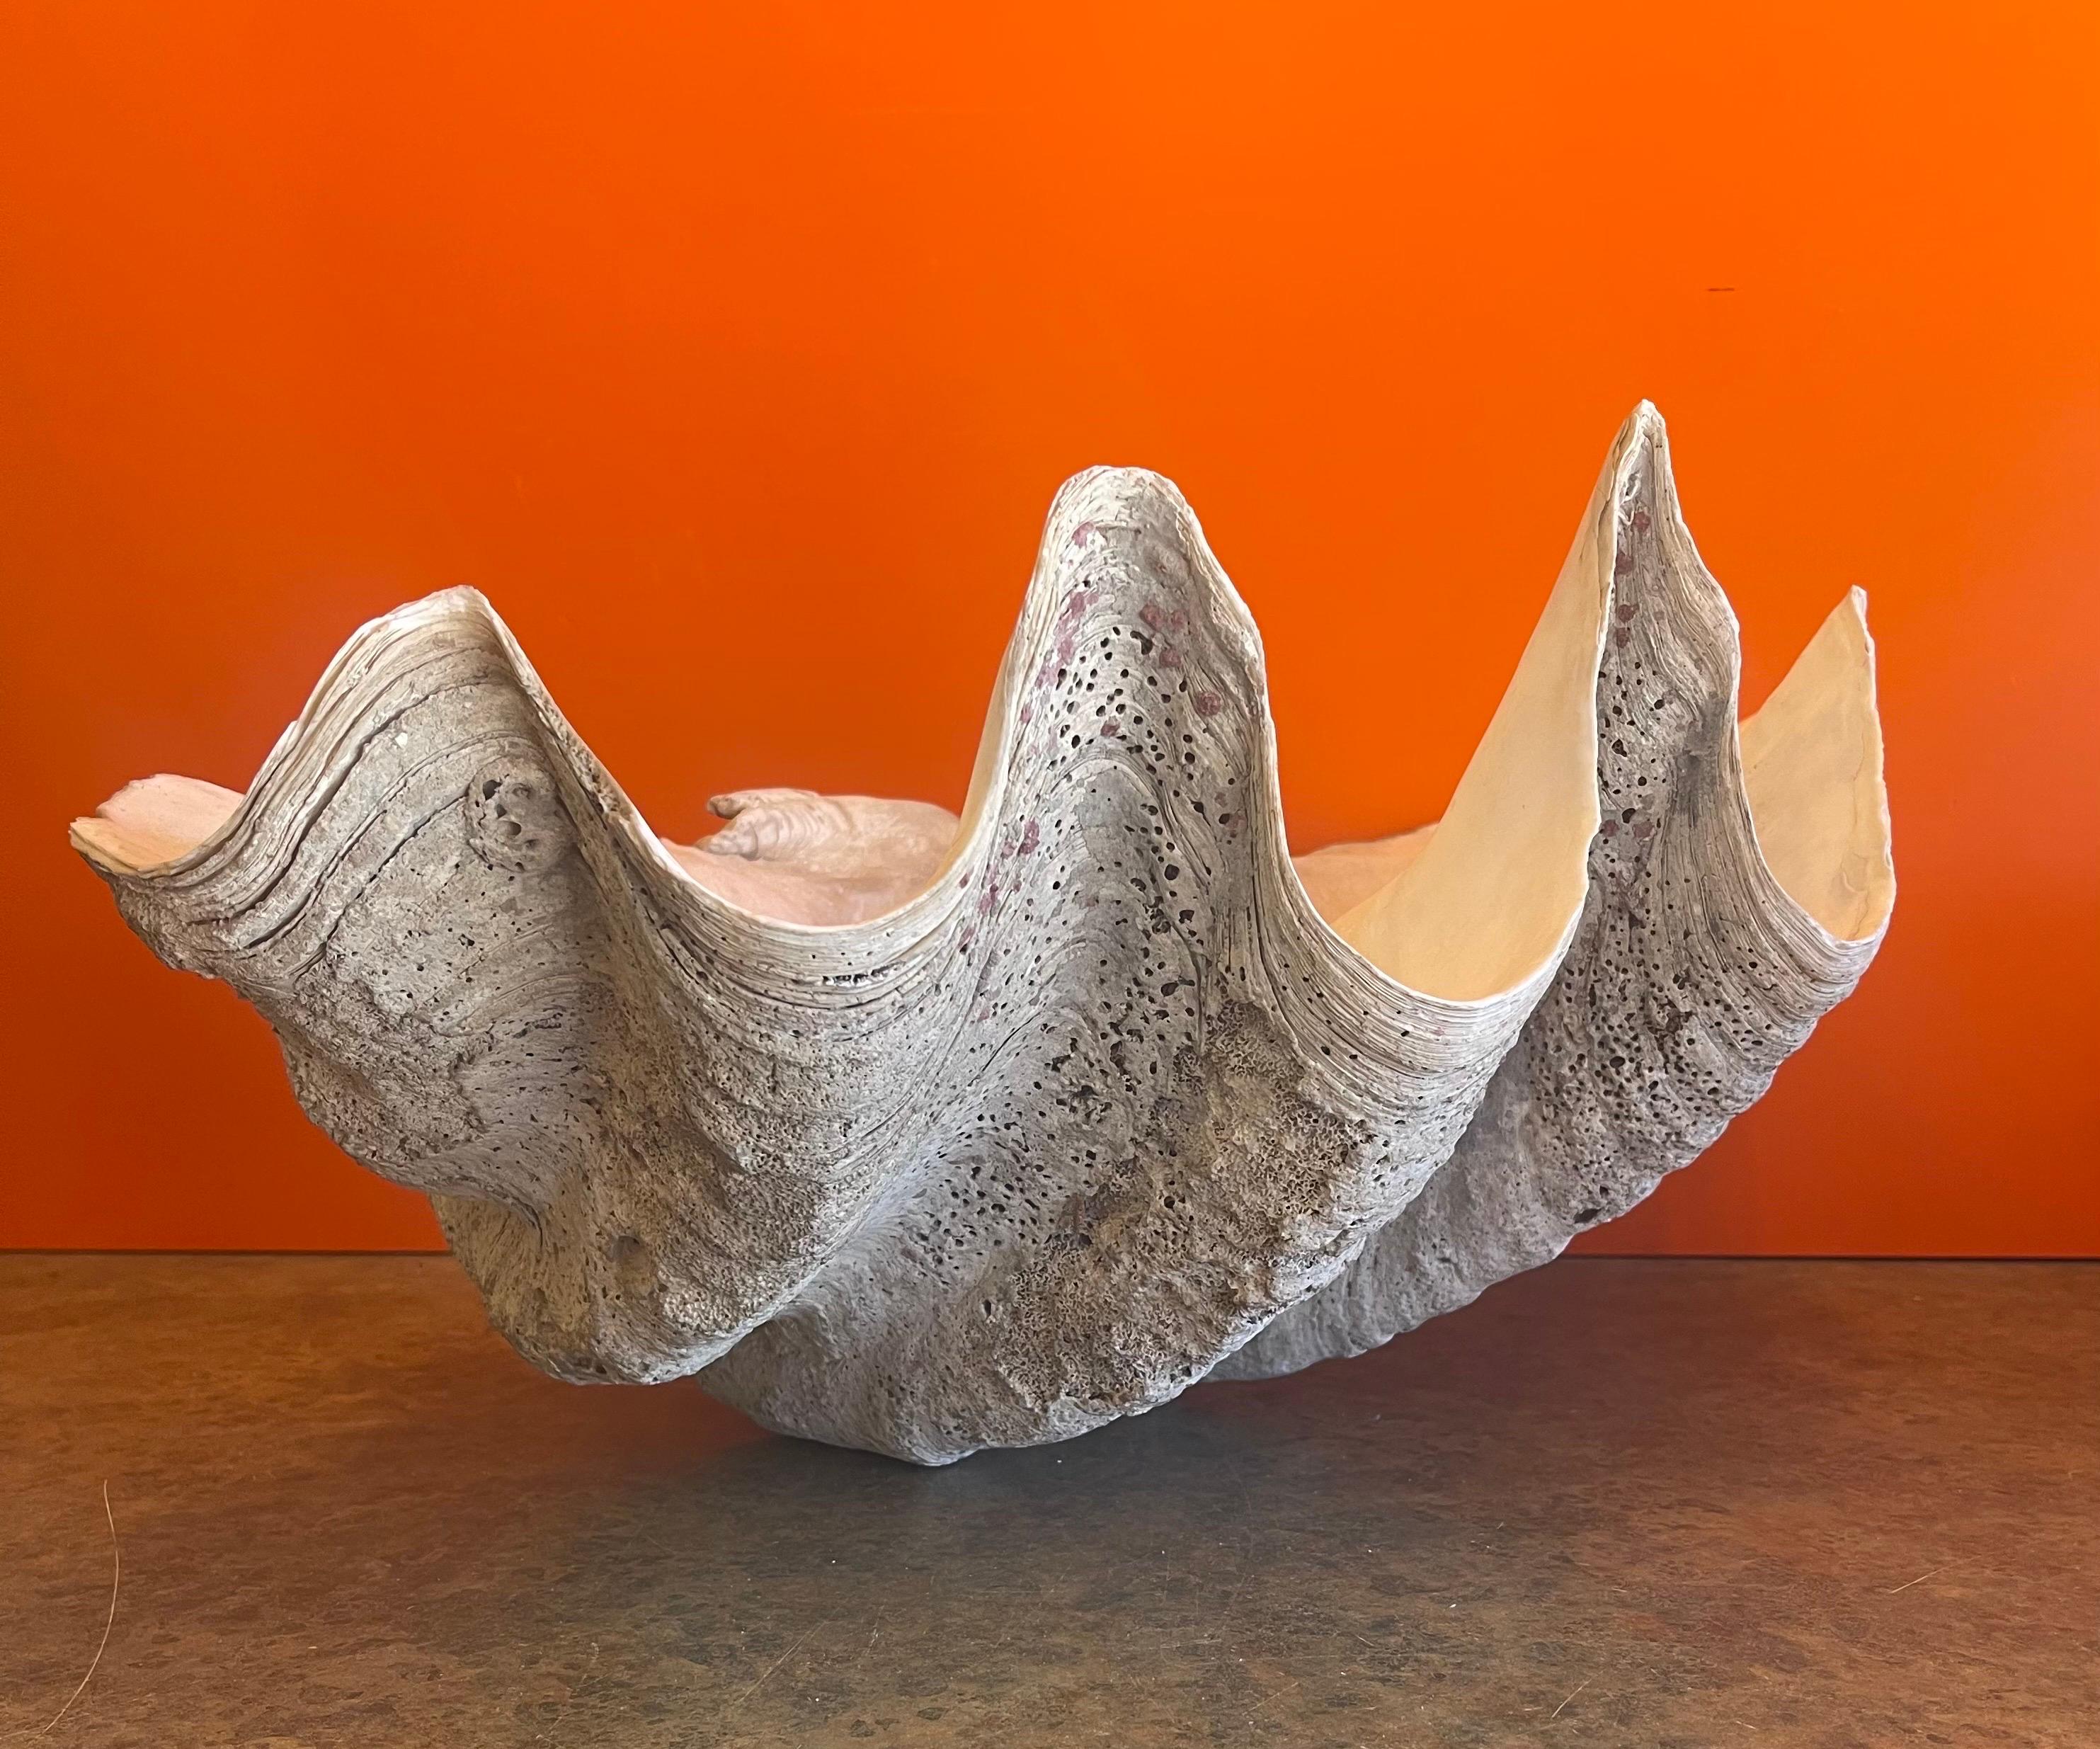 Massive Sculptural Giant South Pacific Clam Shell with Shells and Starfish 2